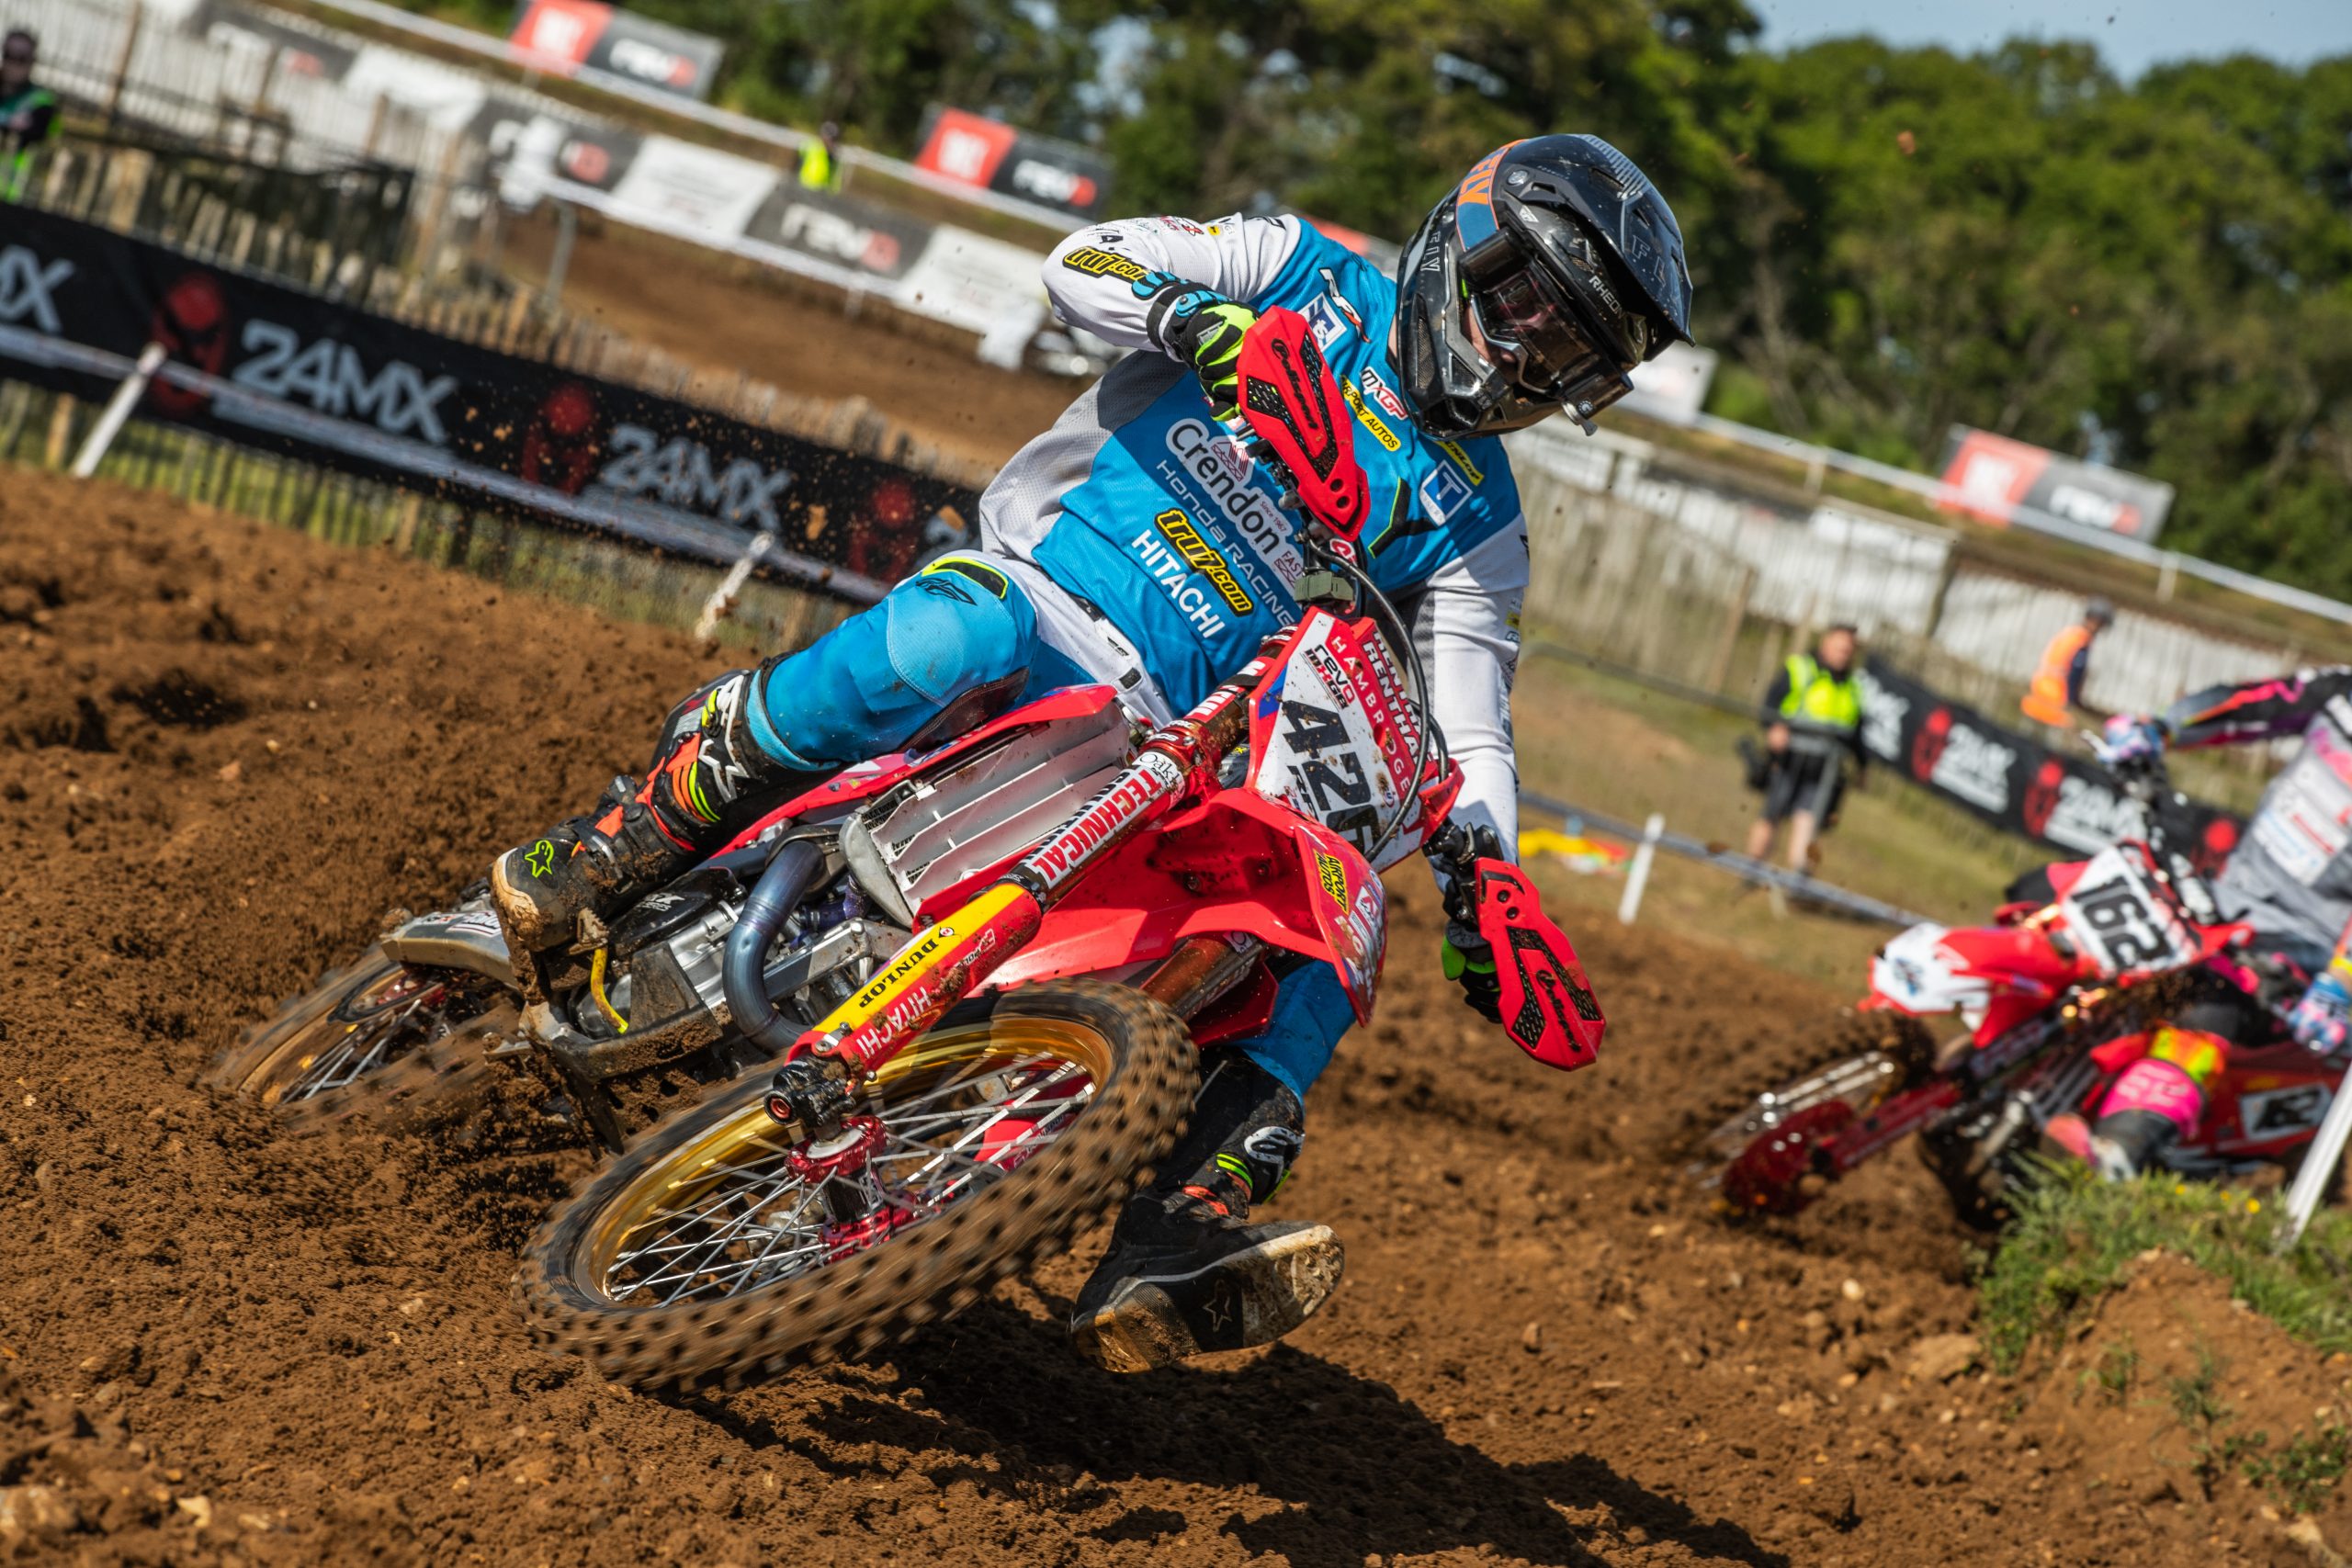 Hawkstone Park British Championship – Entry Lists and more